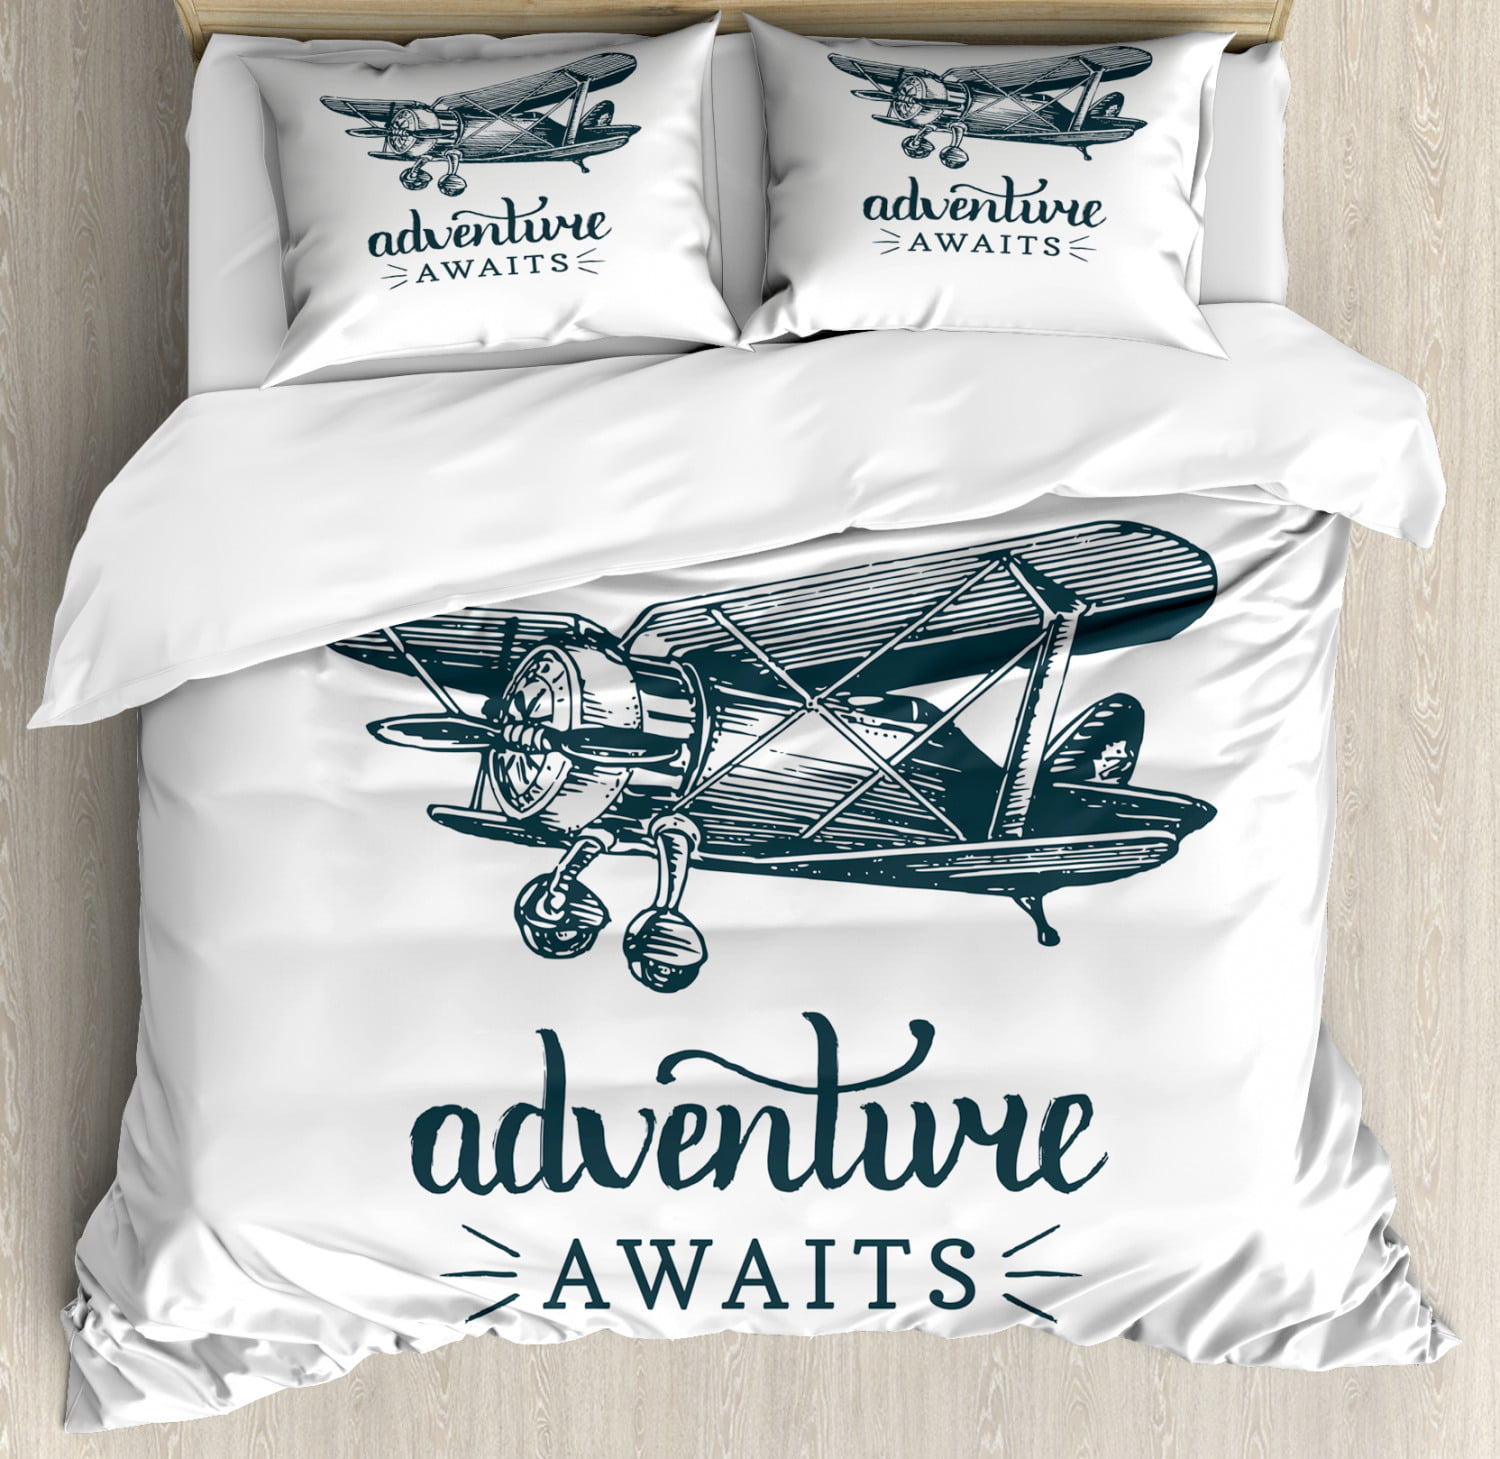 Adventure Awaits Duvet Cover Set Queen Size Vintage Airplane With